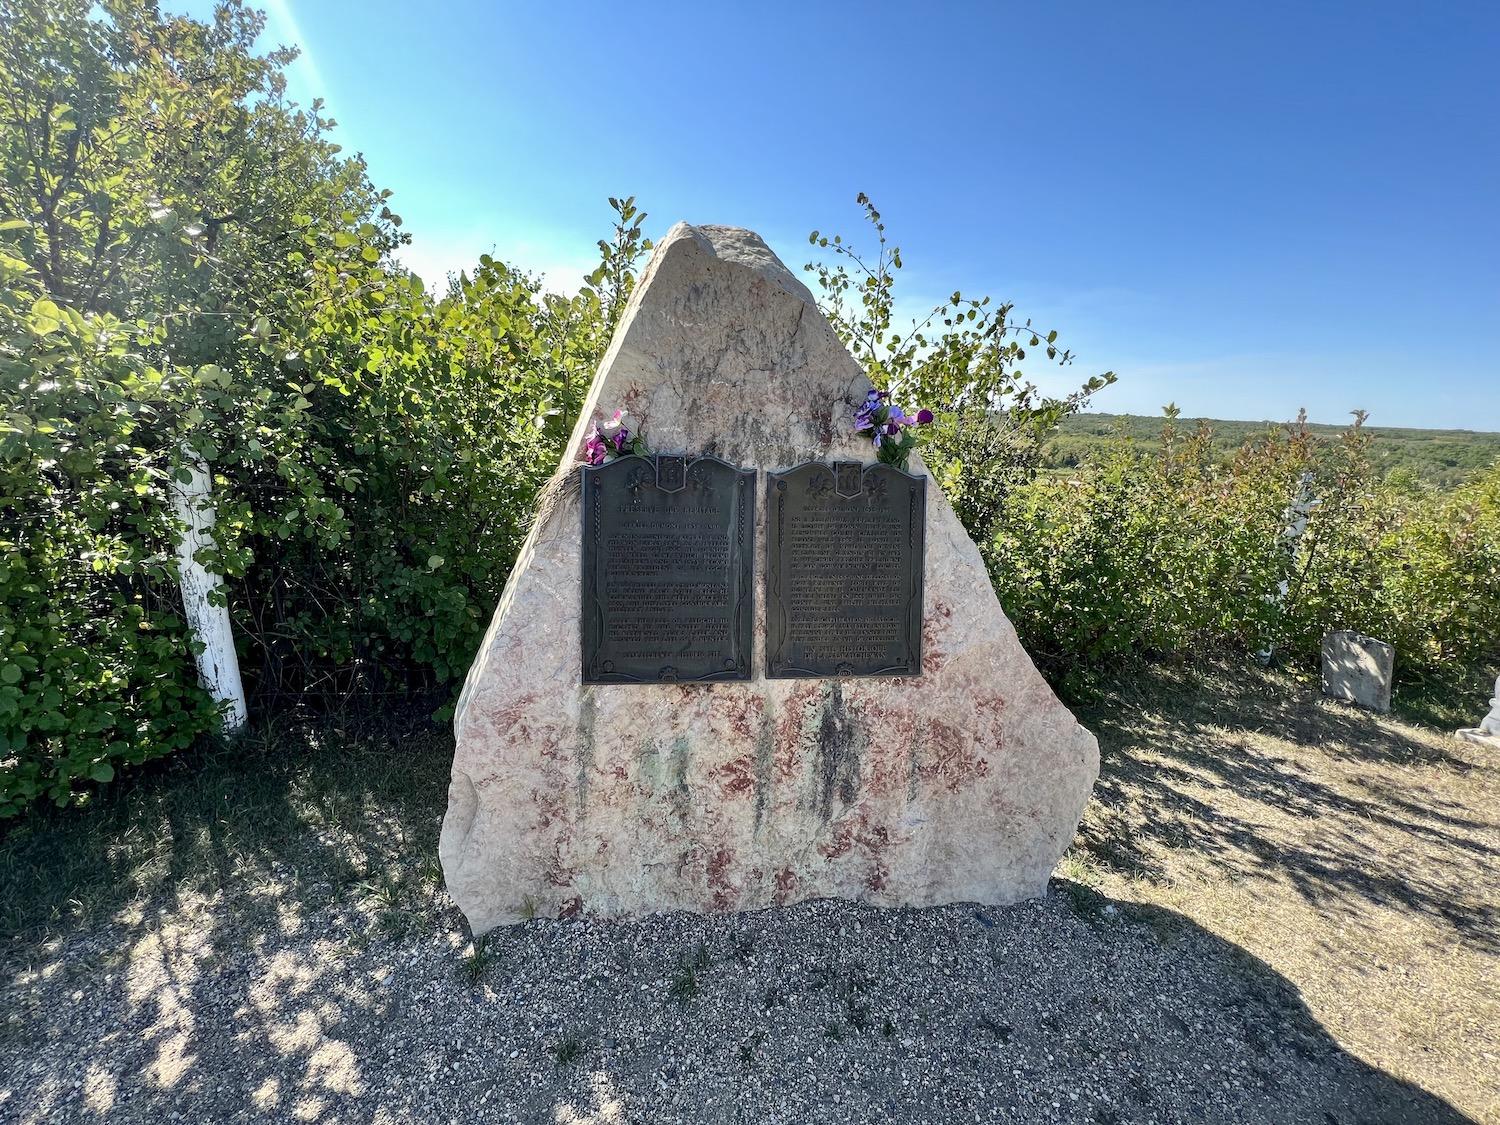 The magnificent rock and plaque that marks the final resting place of Gabriel Dumont, a prominent leader of the Métis people.